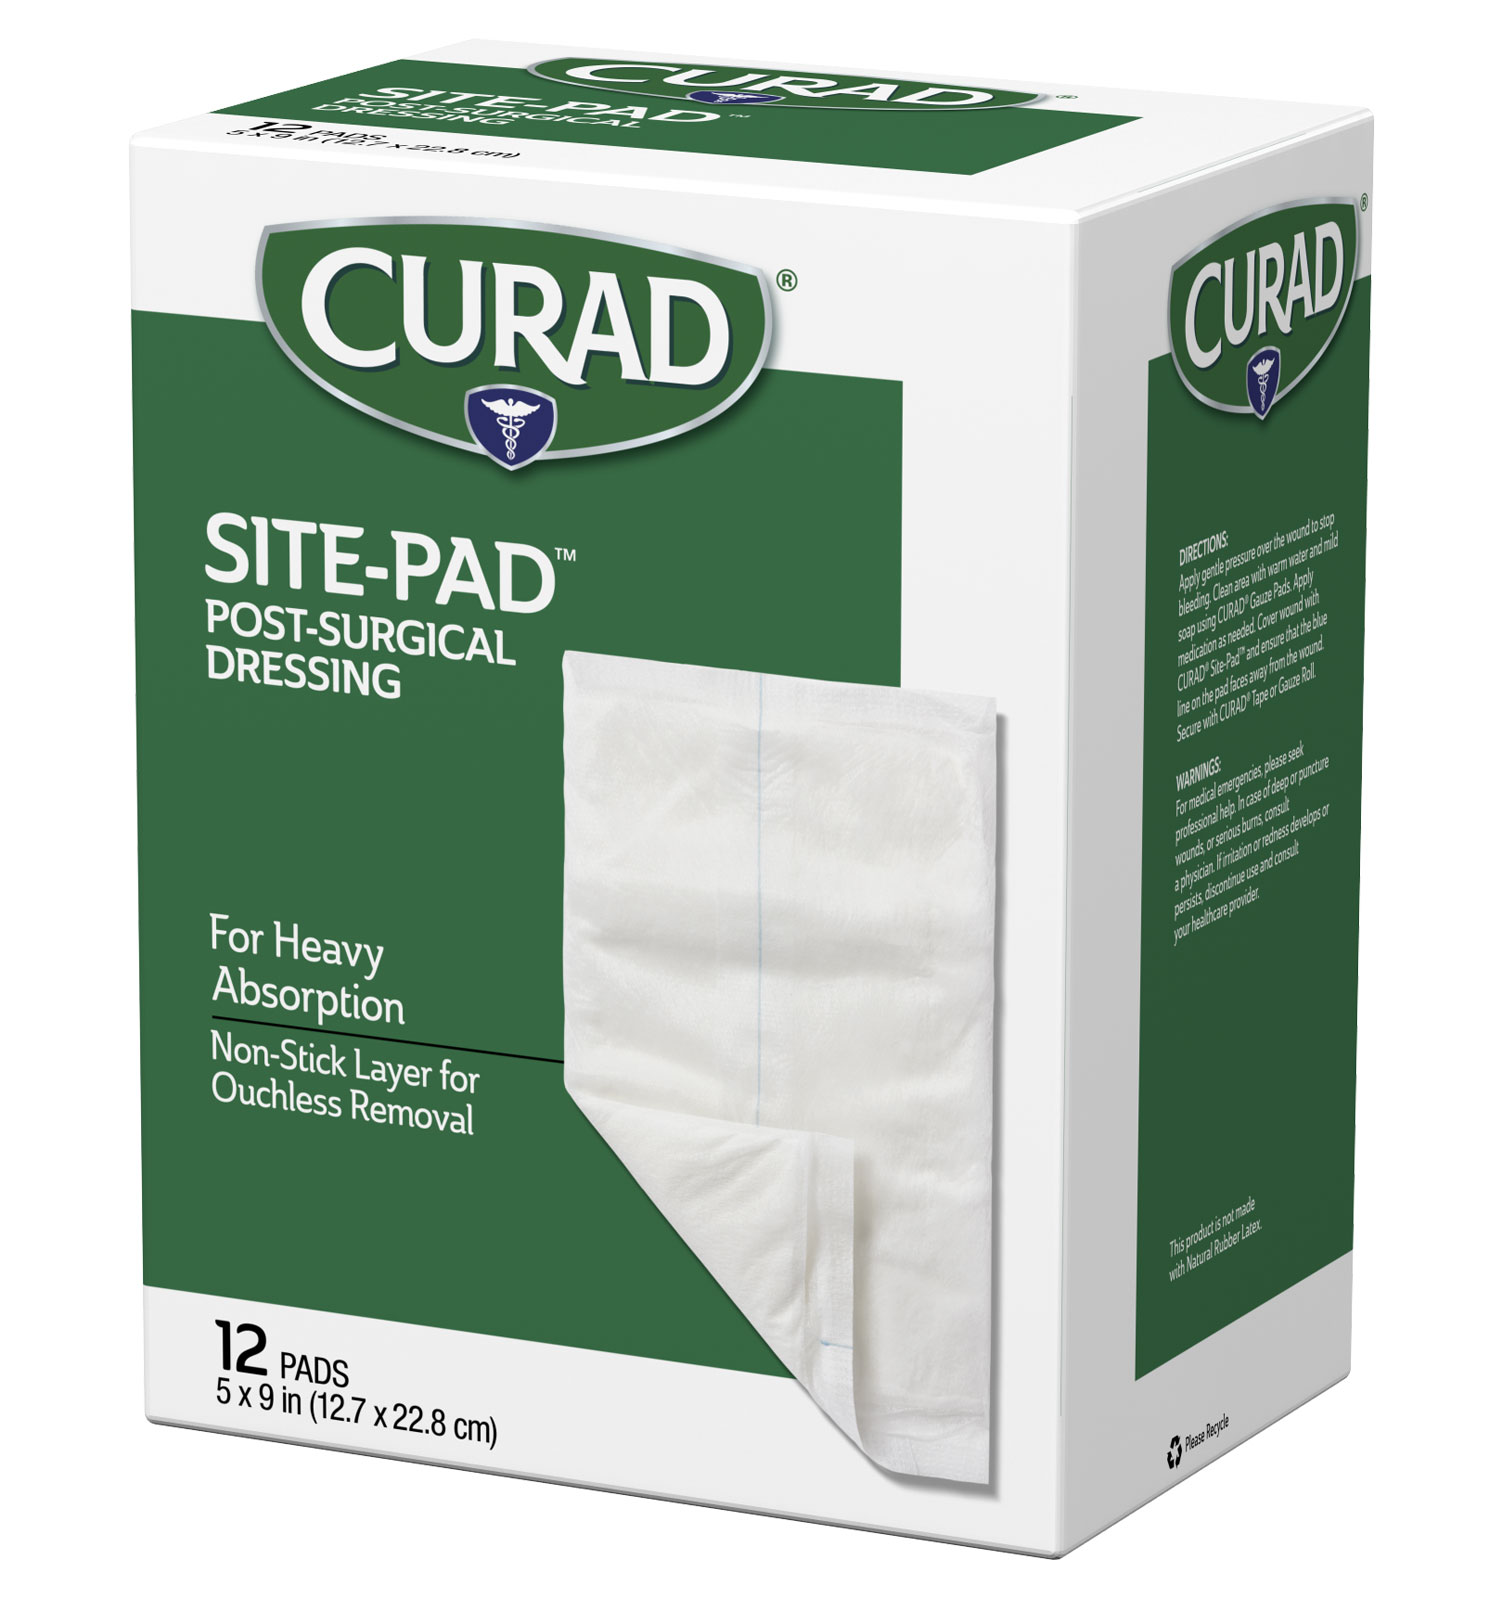 Cushion pads - An eco-friendly paper cushion pad to protect all